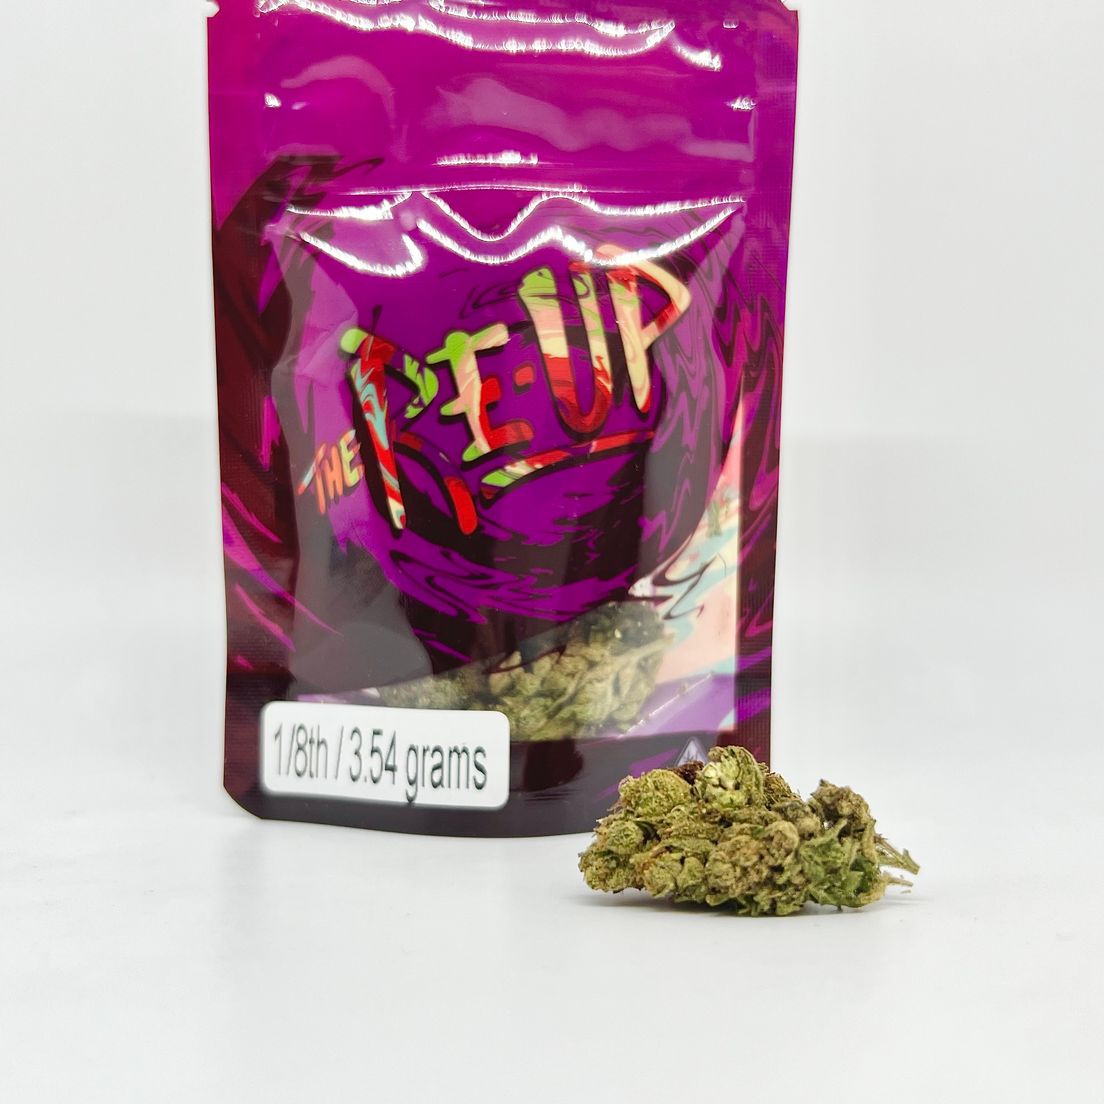 *BLOWOUT DEAL! $25 1/8 Durban Lime (32.2%/Hybrid - Sativa Dominant) - The Re-Up